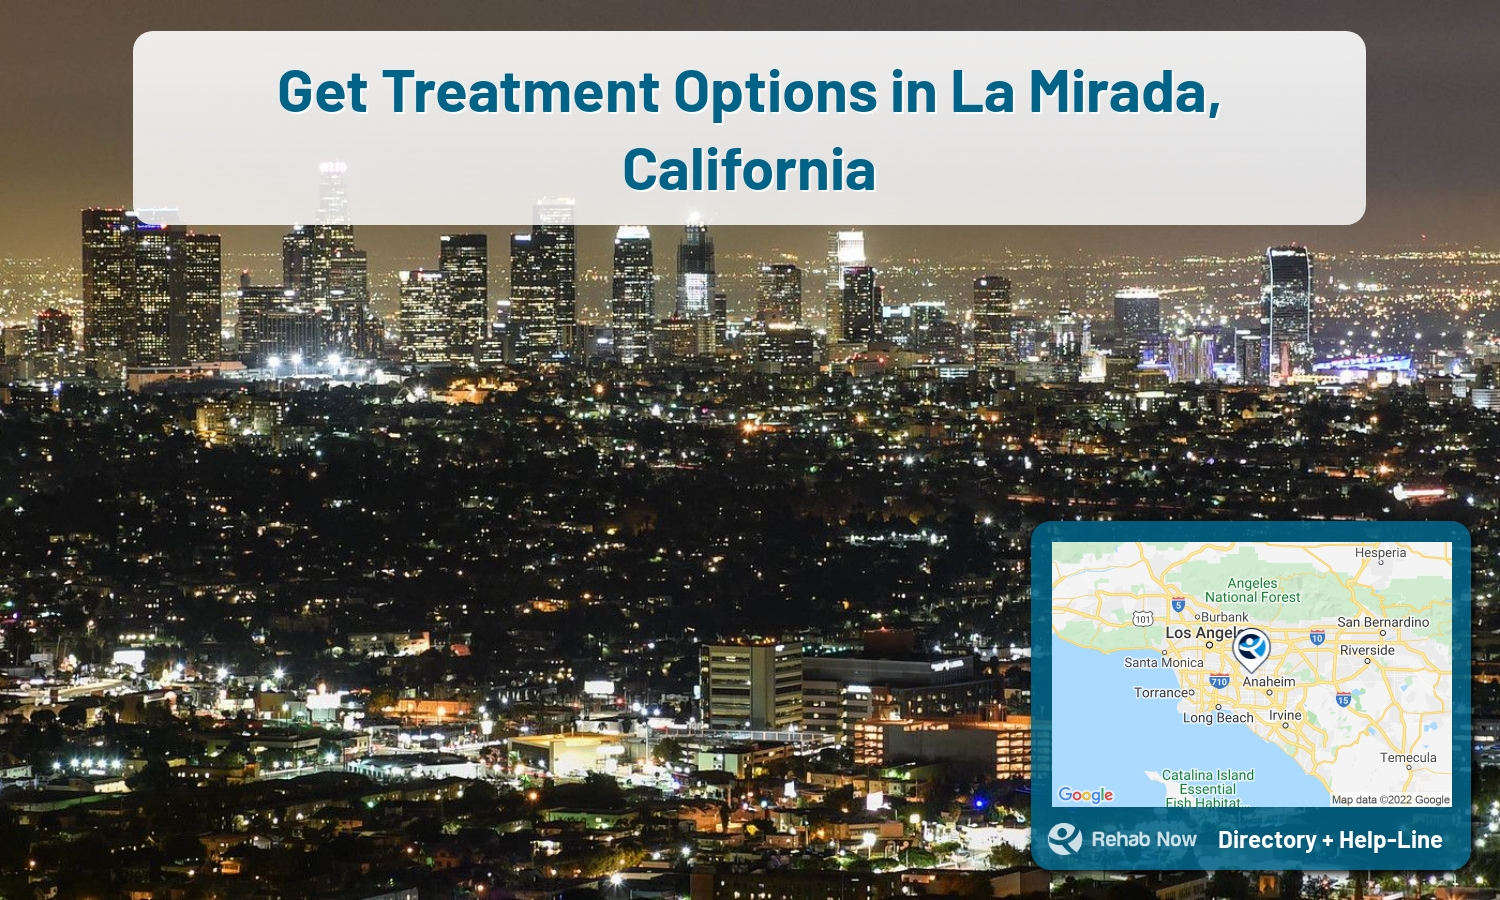 List of alcohol and drug treatment centers near you in La Mirada, California. Research certifications, programs, methods, pricing, and more.